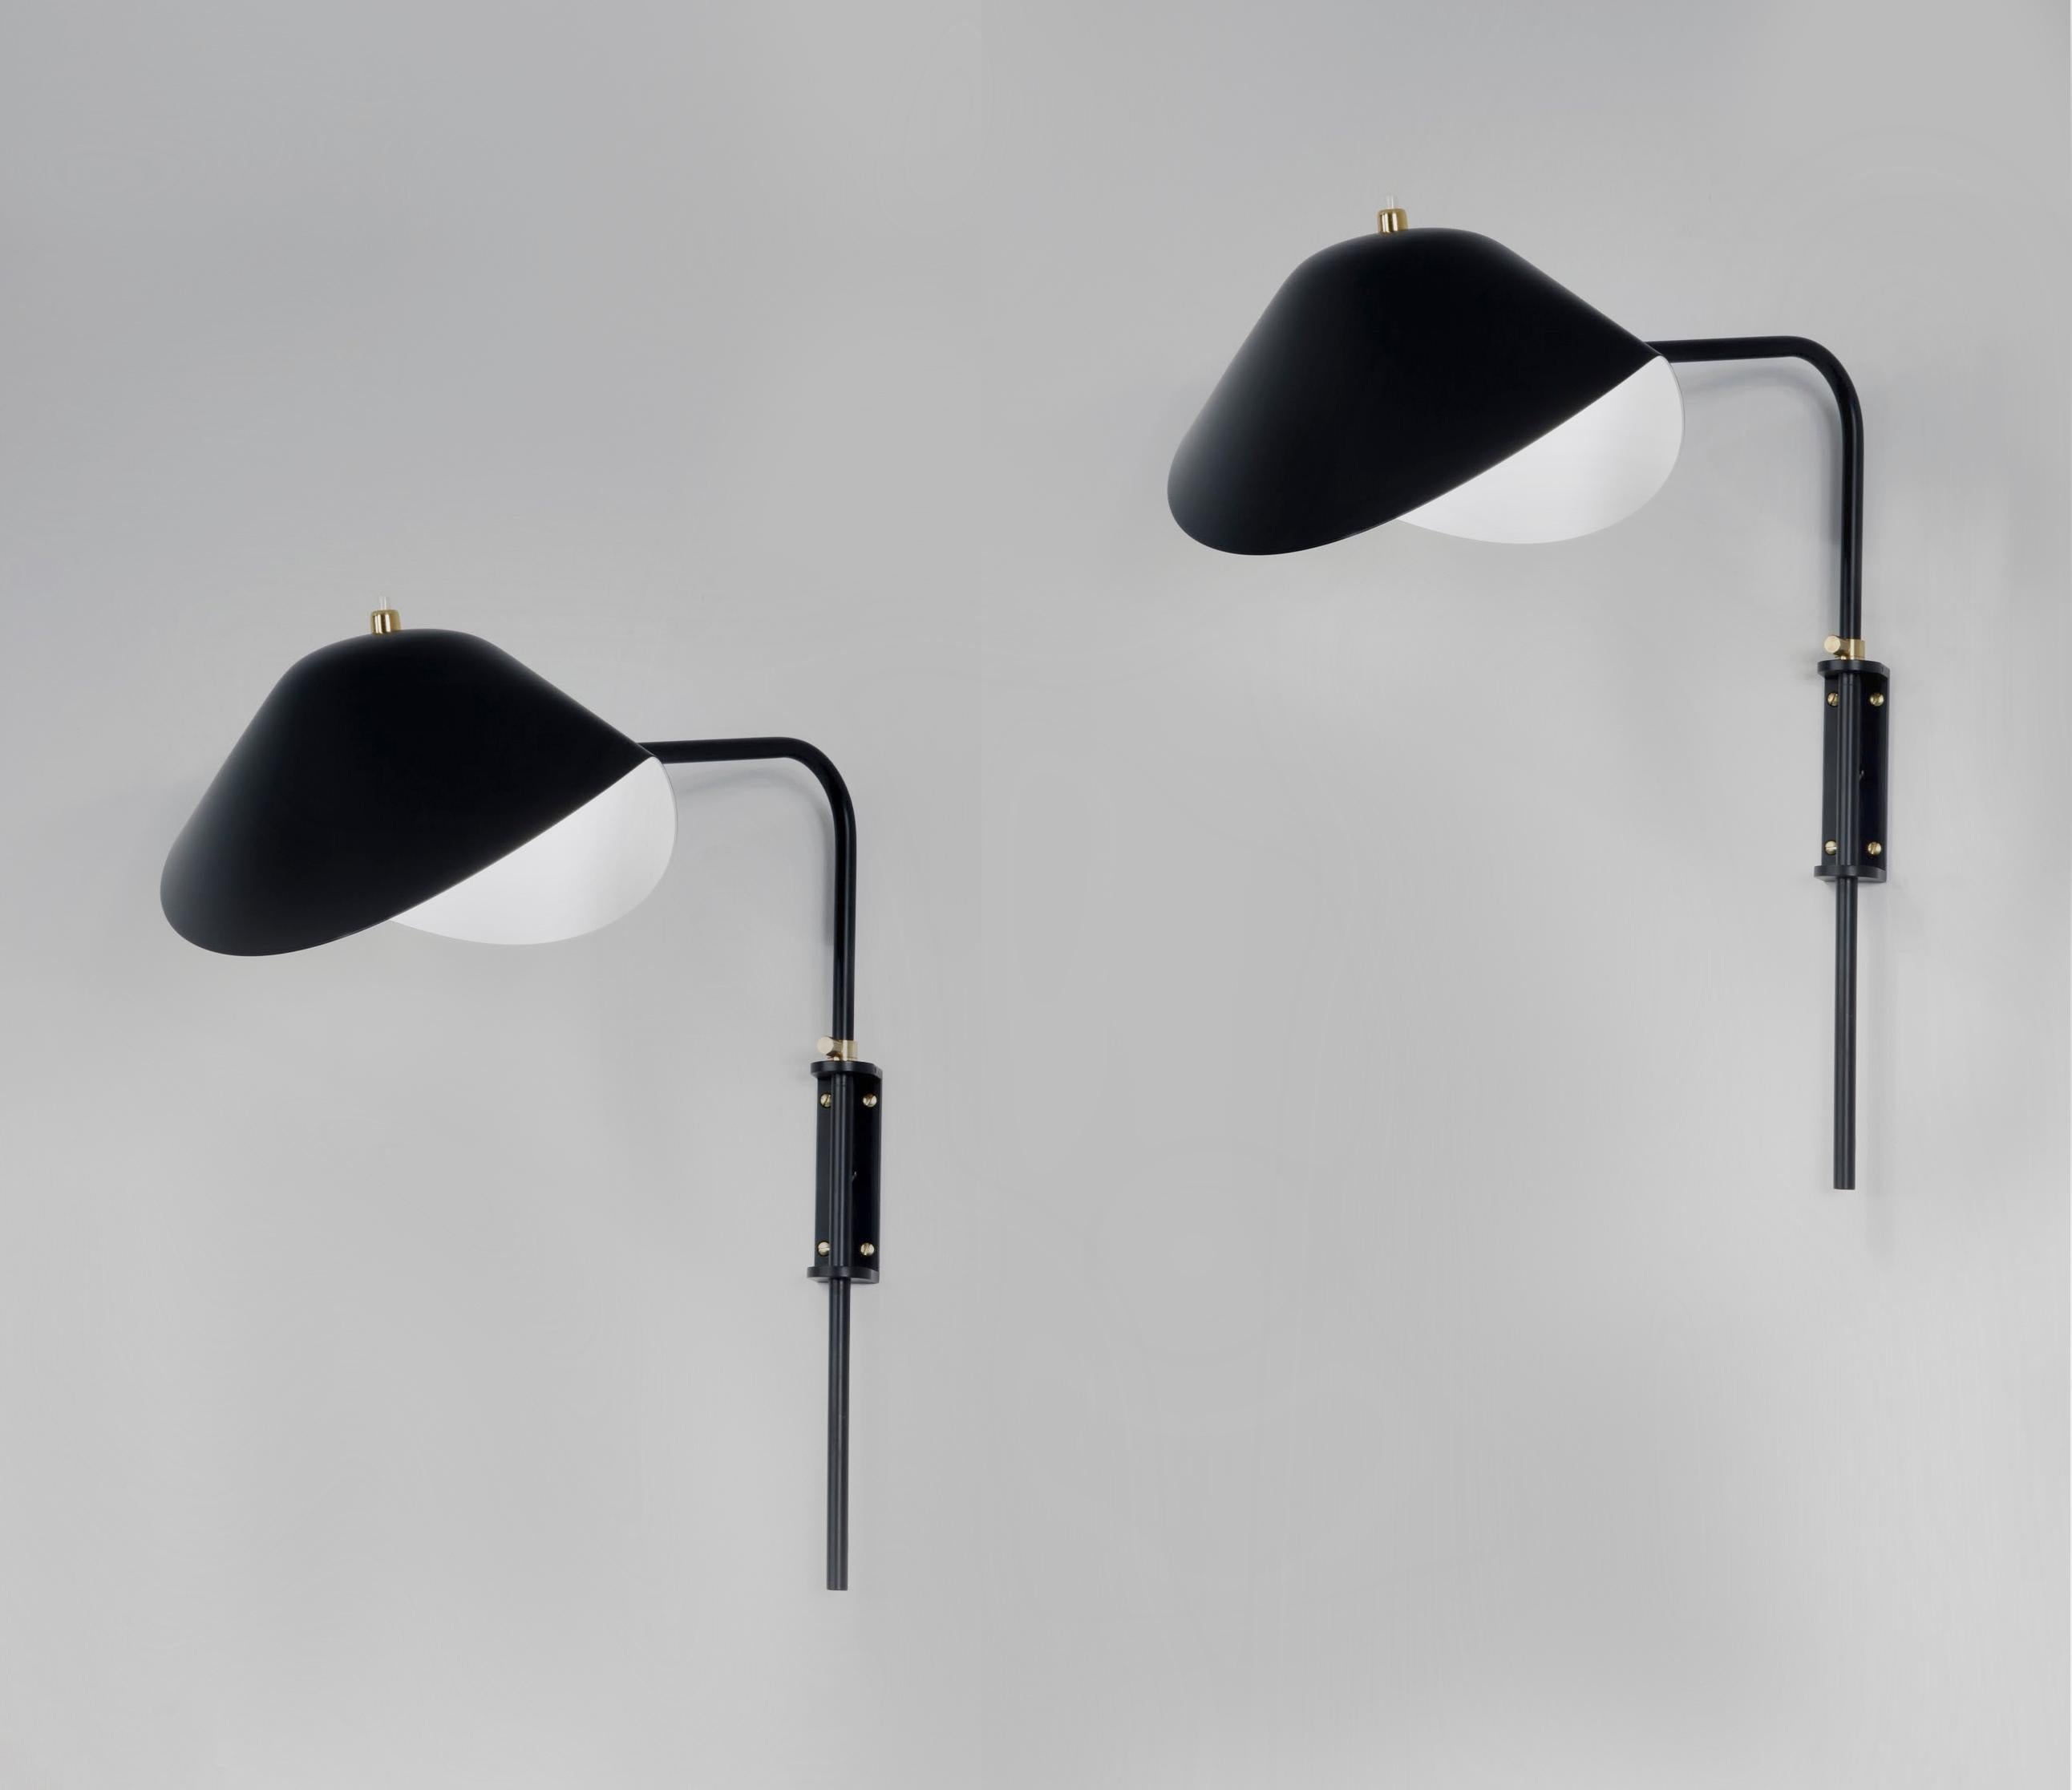 Mid-Century Modern Serge Mouille Black Anthony Wall Lamp Whit Fixing Bracket Set Re-Edition For Sale